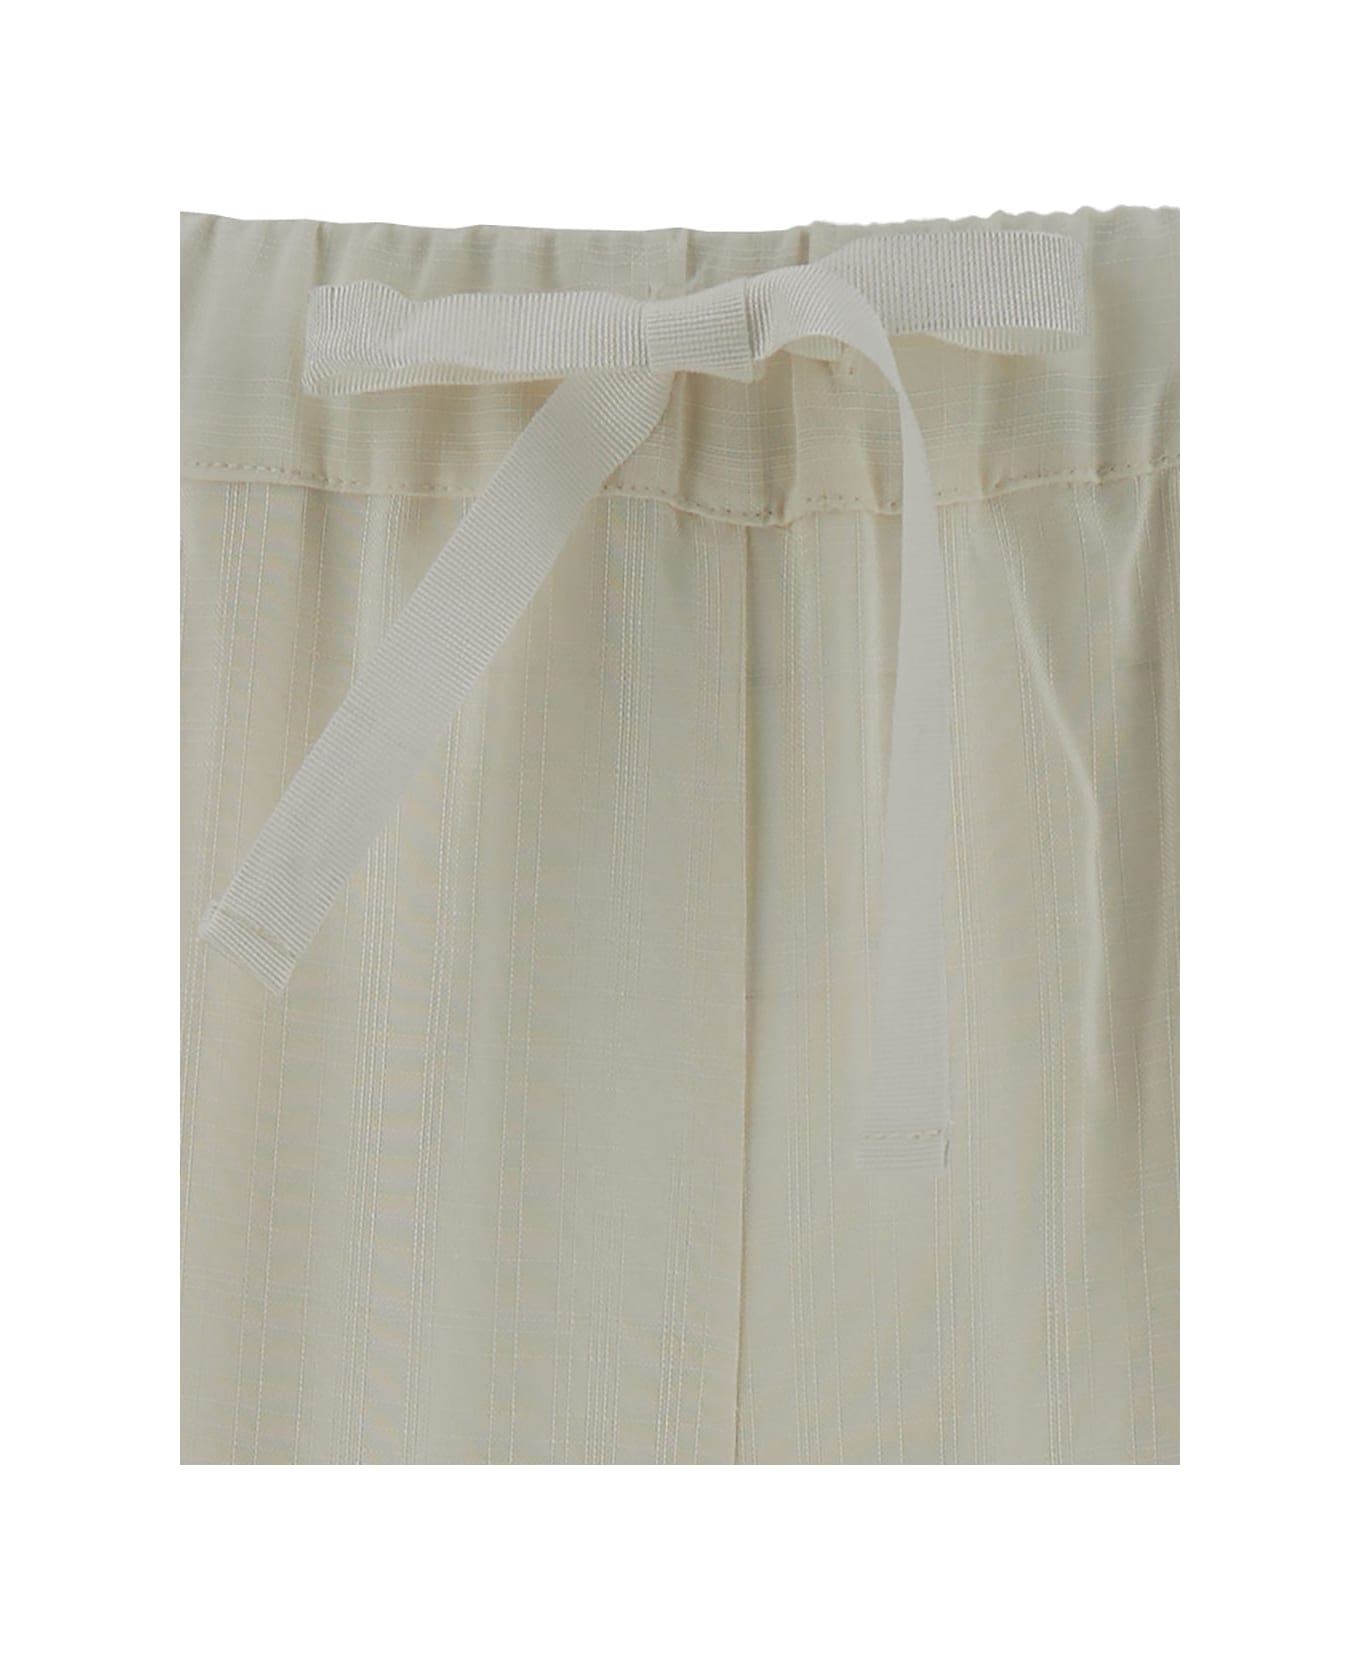 SEMICOUTURE Off-white Pants With Drawstring In Viscose Woman - White ボトムス